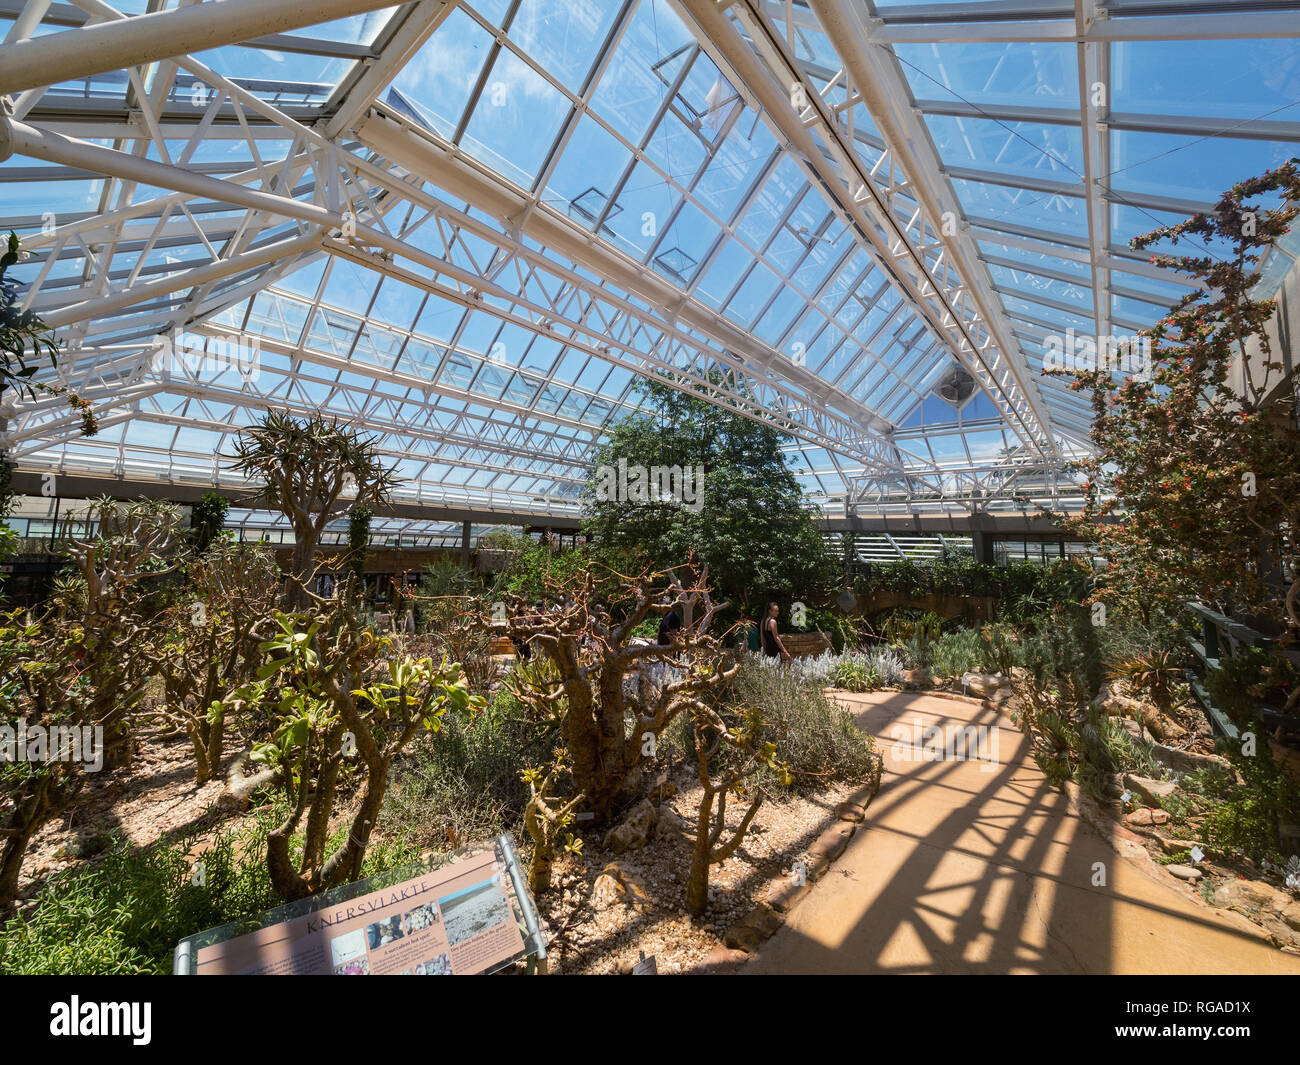 CAPE TOWN, SOUTH AFRICA - DECEMBER 2018. View of the interior of the glasshouse in the Kirstenbosch Botanical Garden in Cape Town Stock Photo